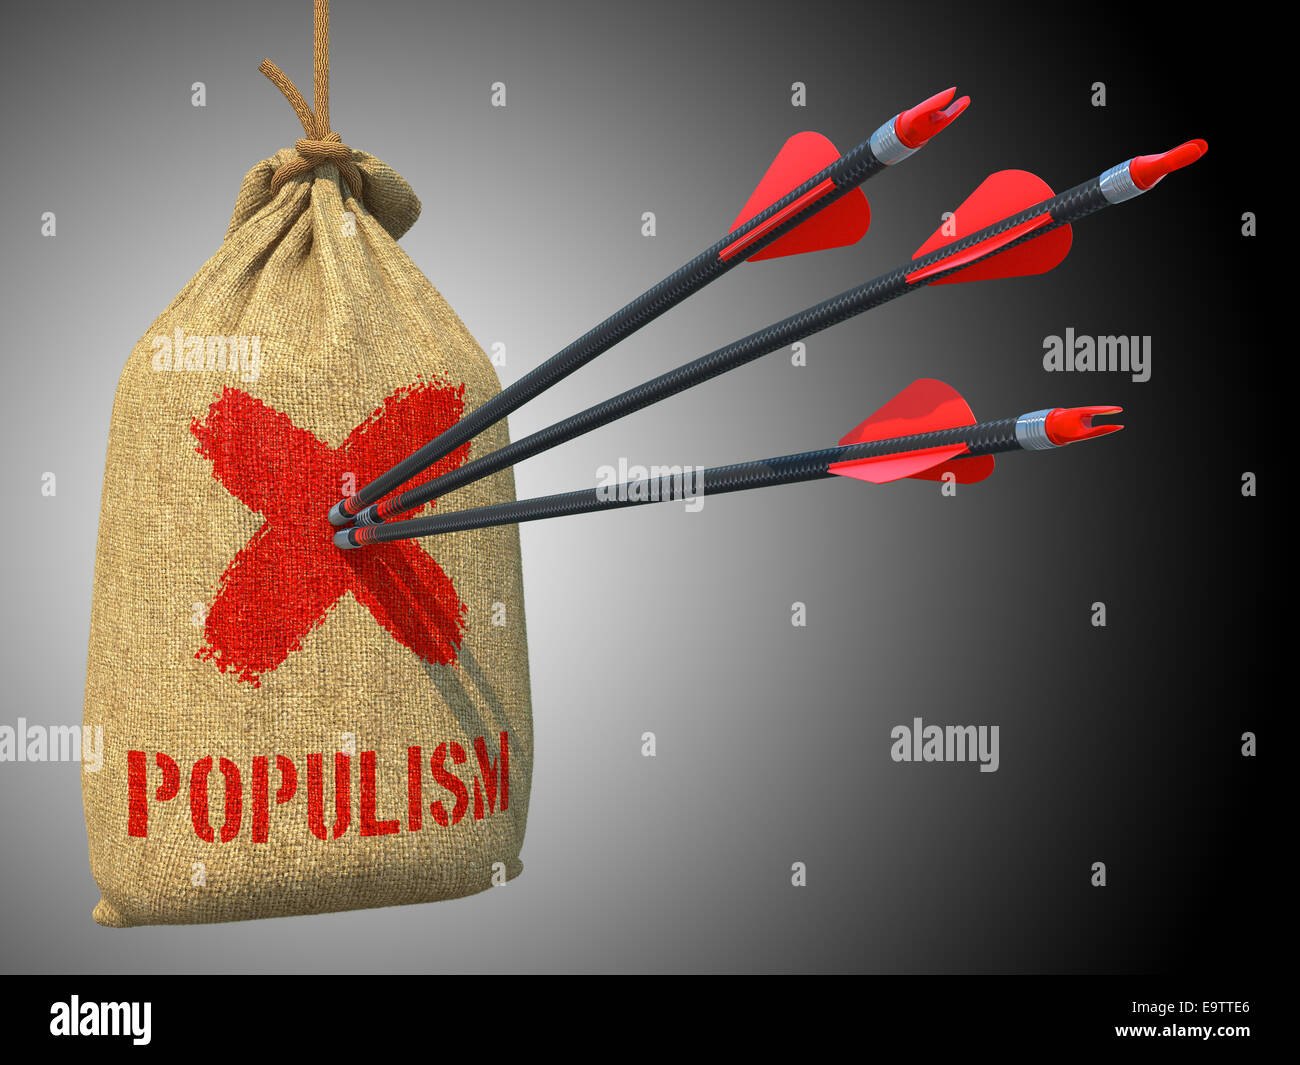 Populism - Three Arrows Hit in Red Target on a Hanging Sack on Green Bokeh Background. Stock Photo